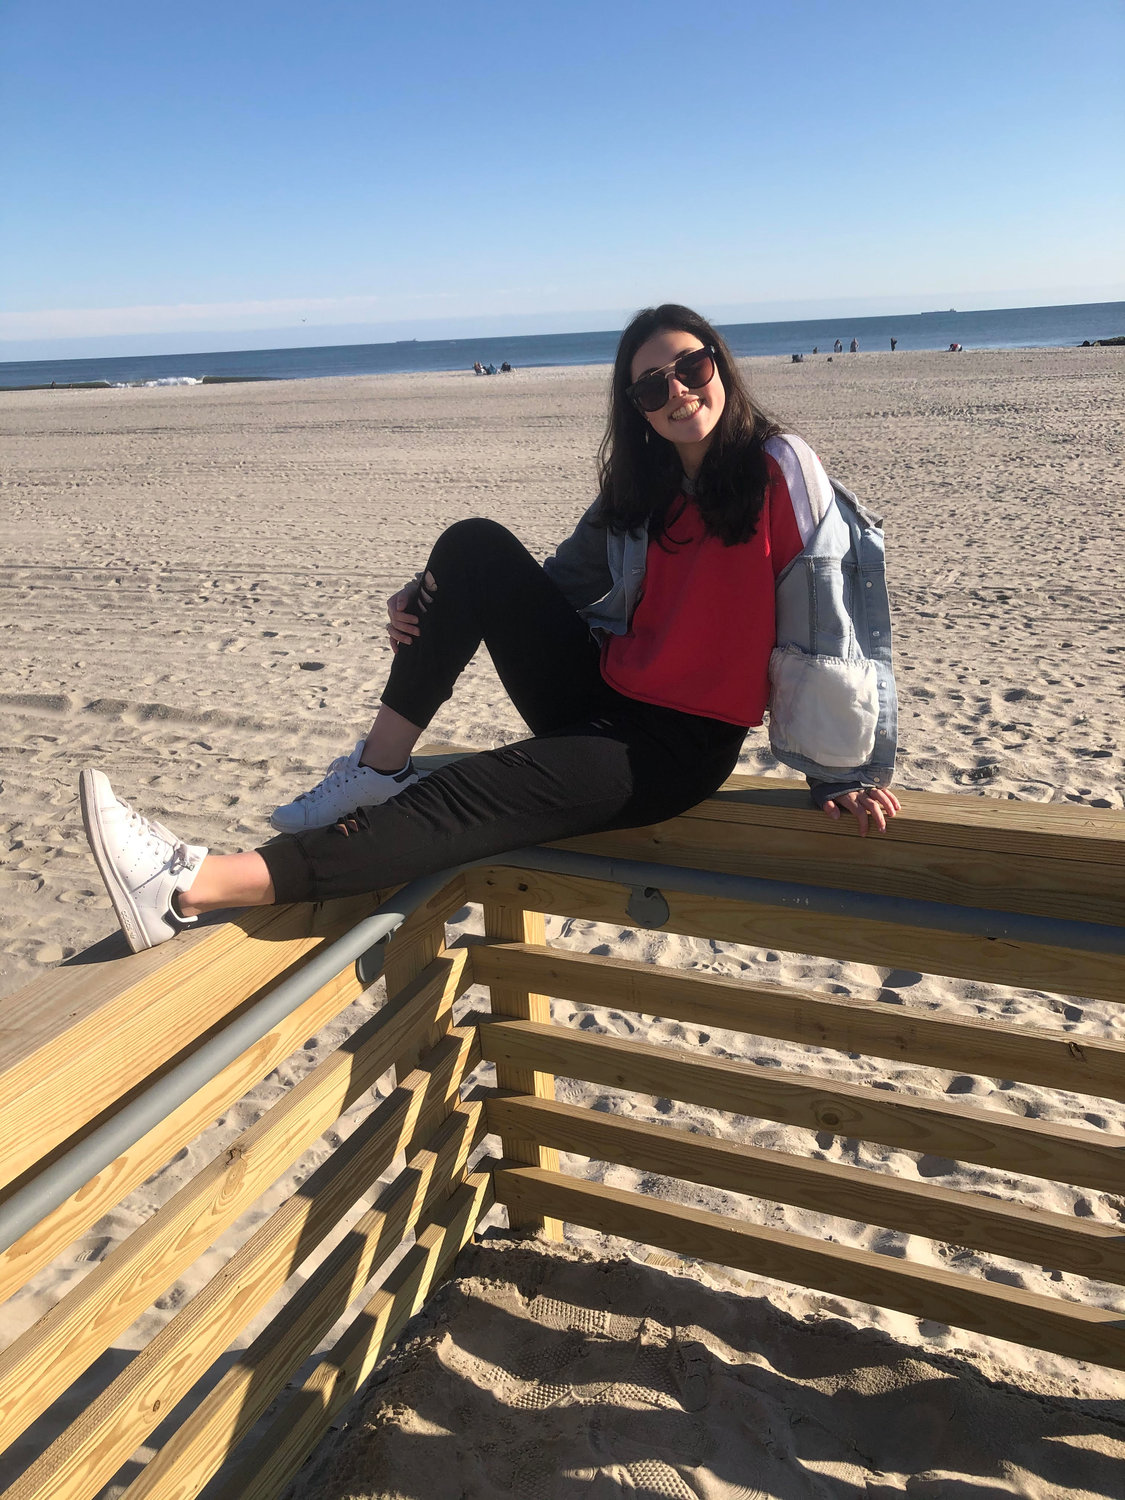 Bryanin Sacher, an Oceanside High School sophomore and member of the OHS Youth Council, which has helped organize Wellness Week starting May 4, strives to get outside for regular walks as part of her self care routine.